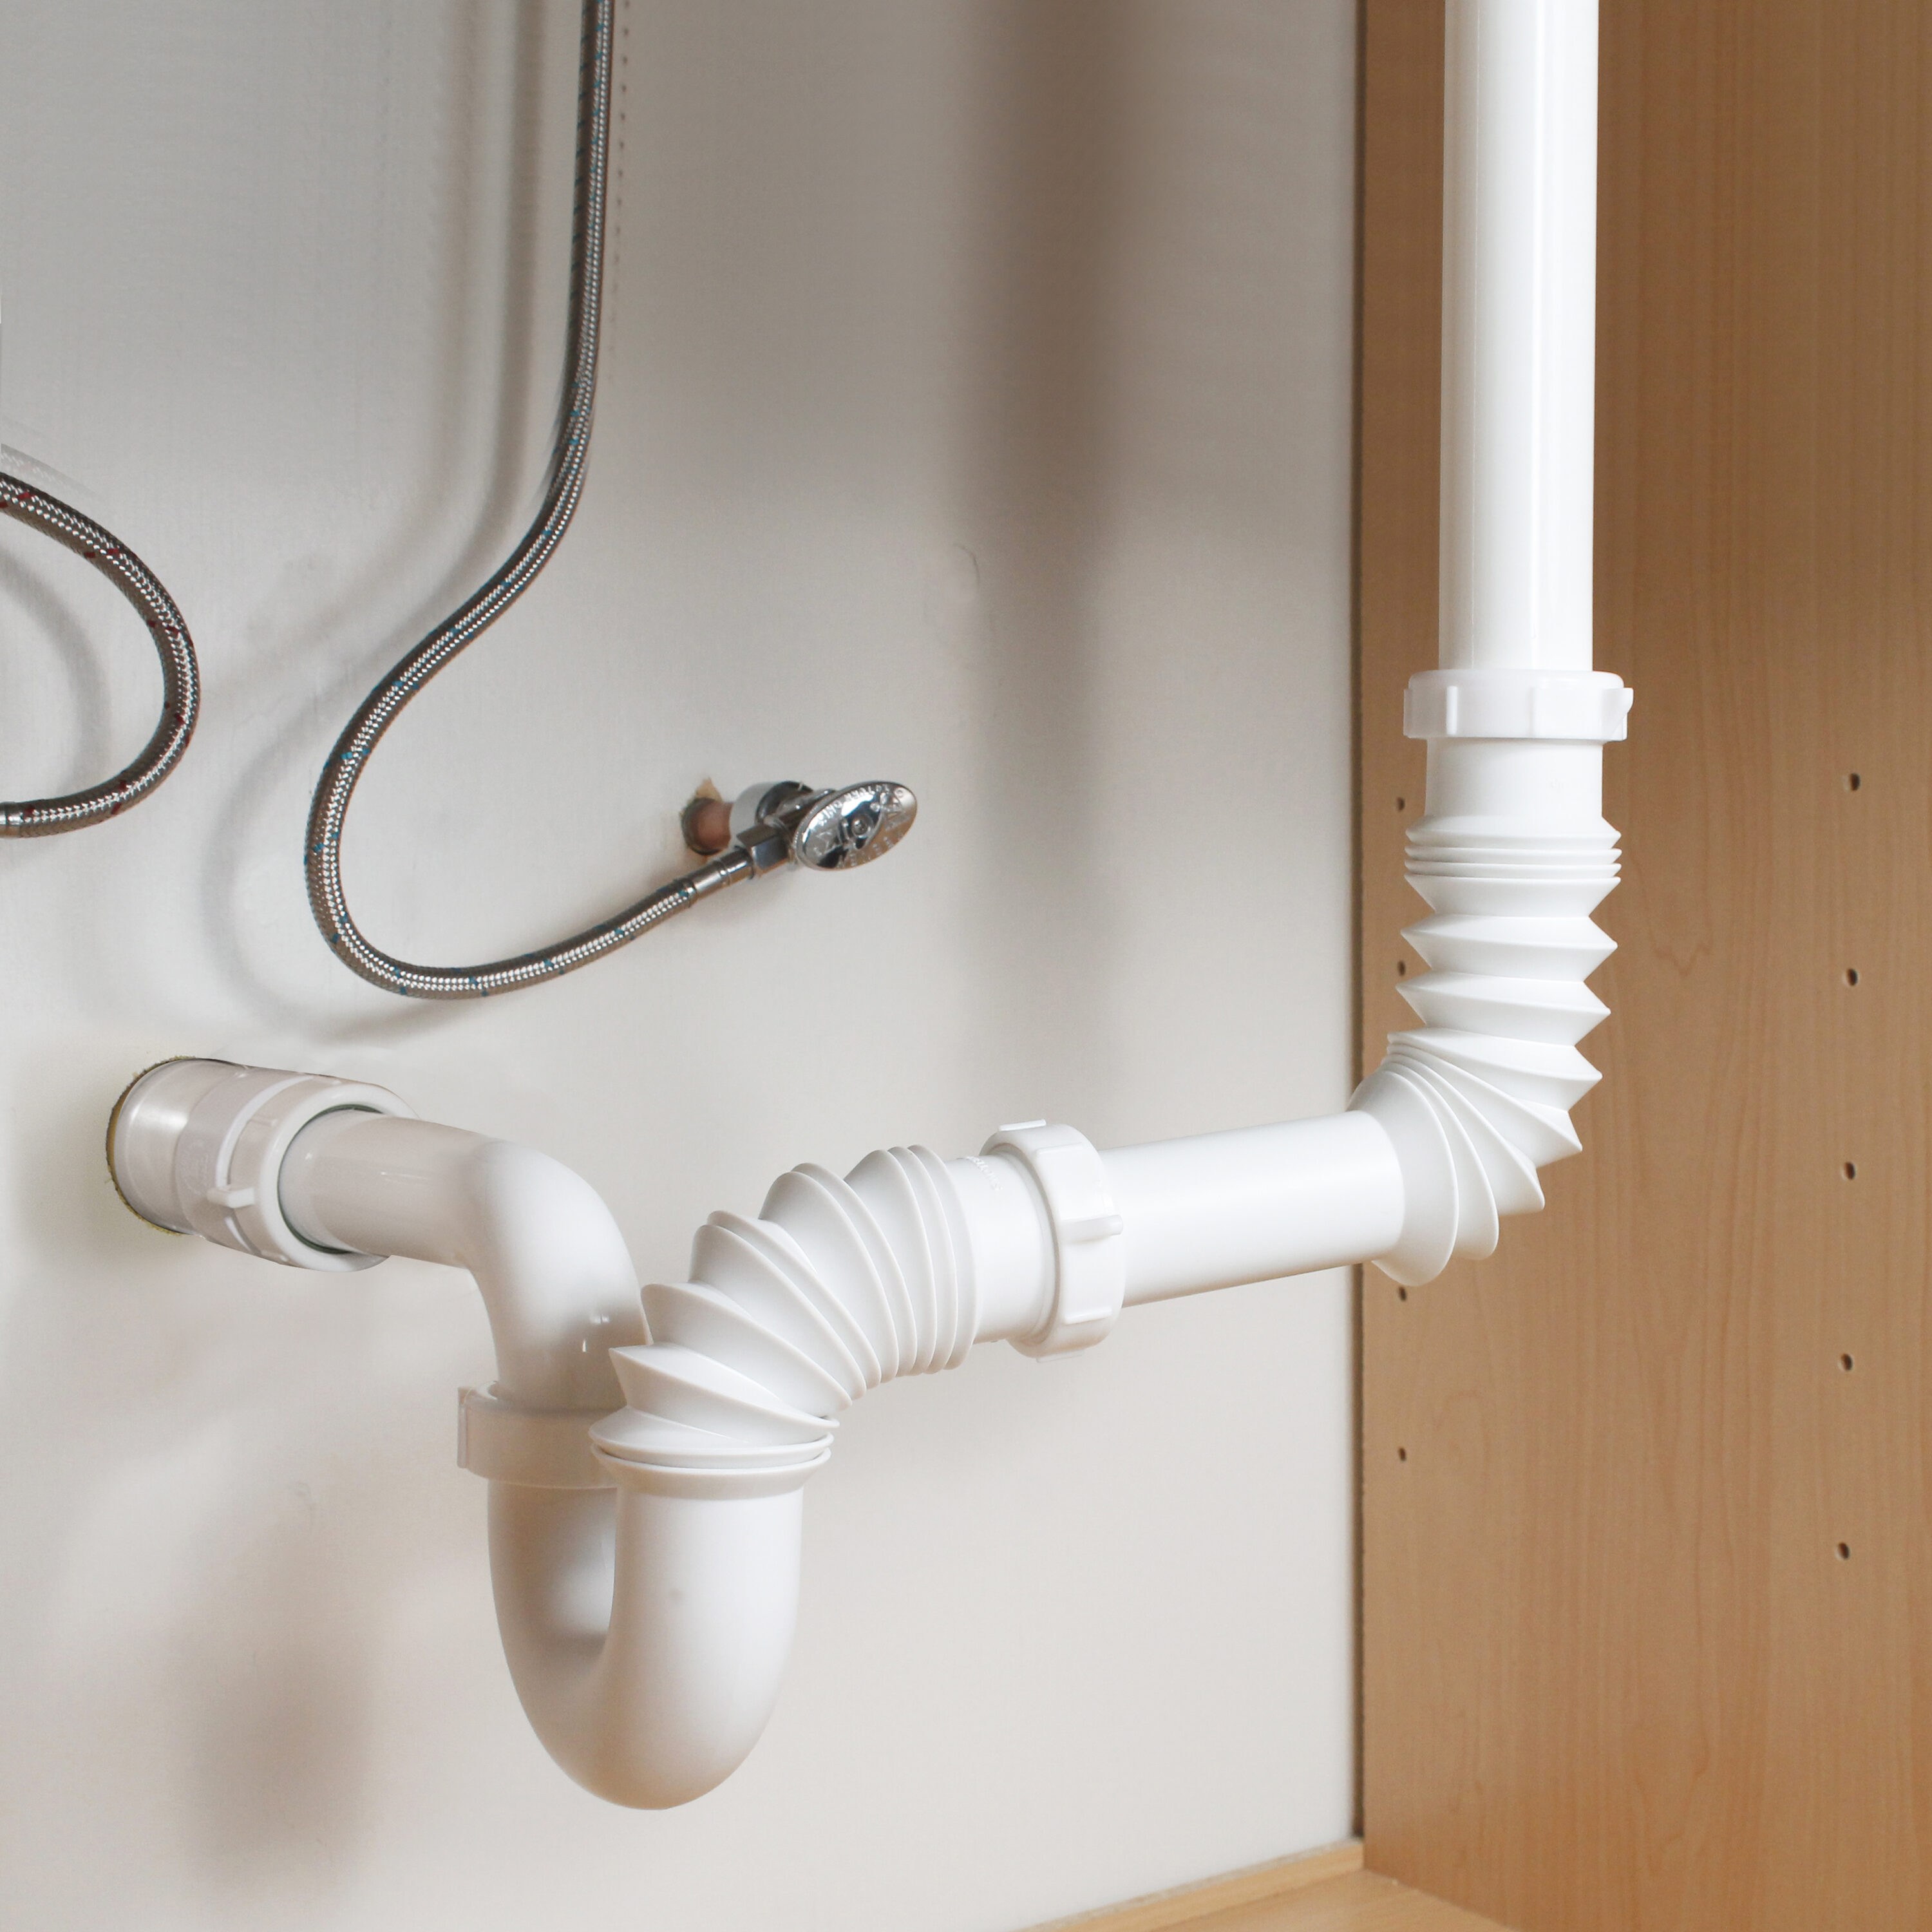 Slip joint extension tube Under Sink Plumbing at